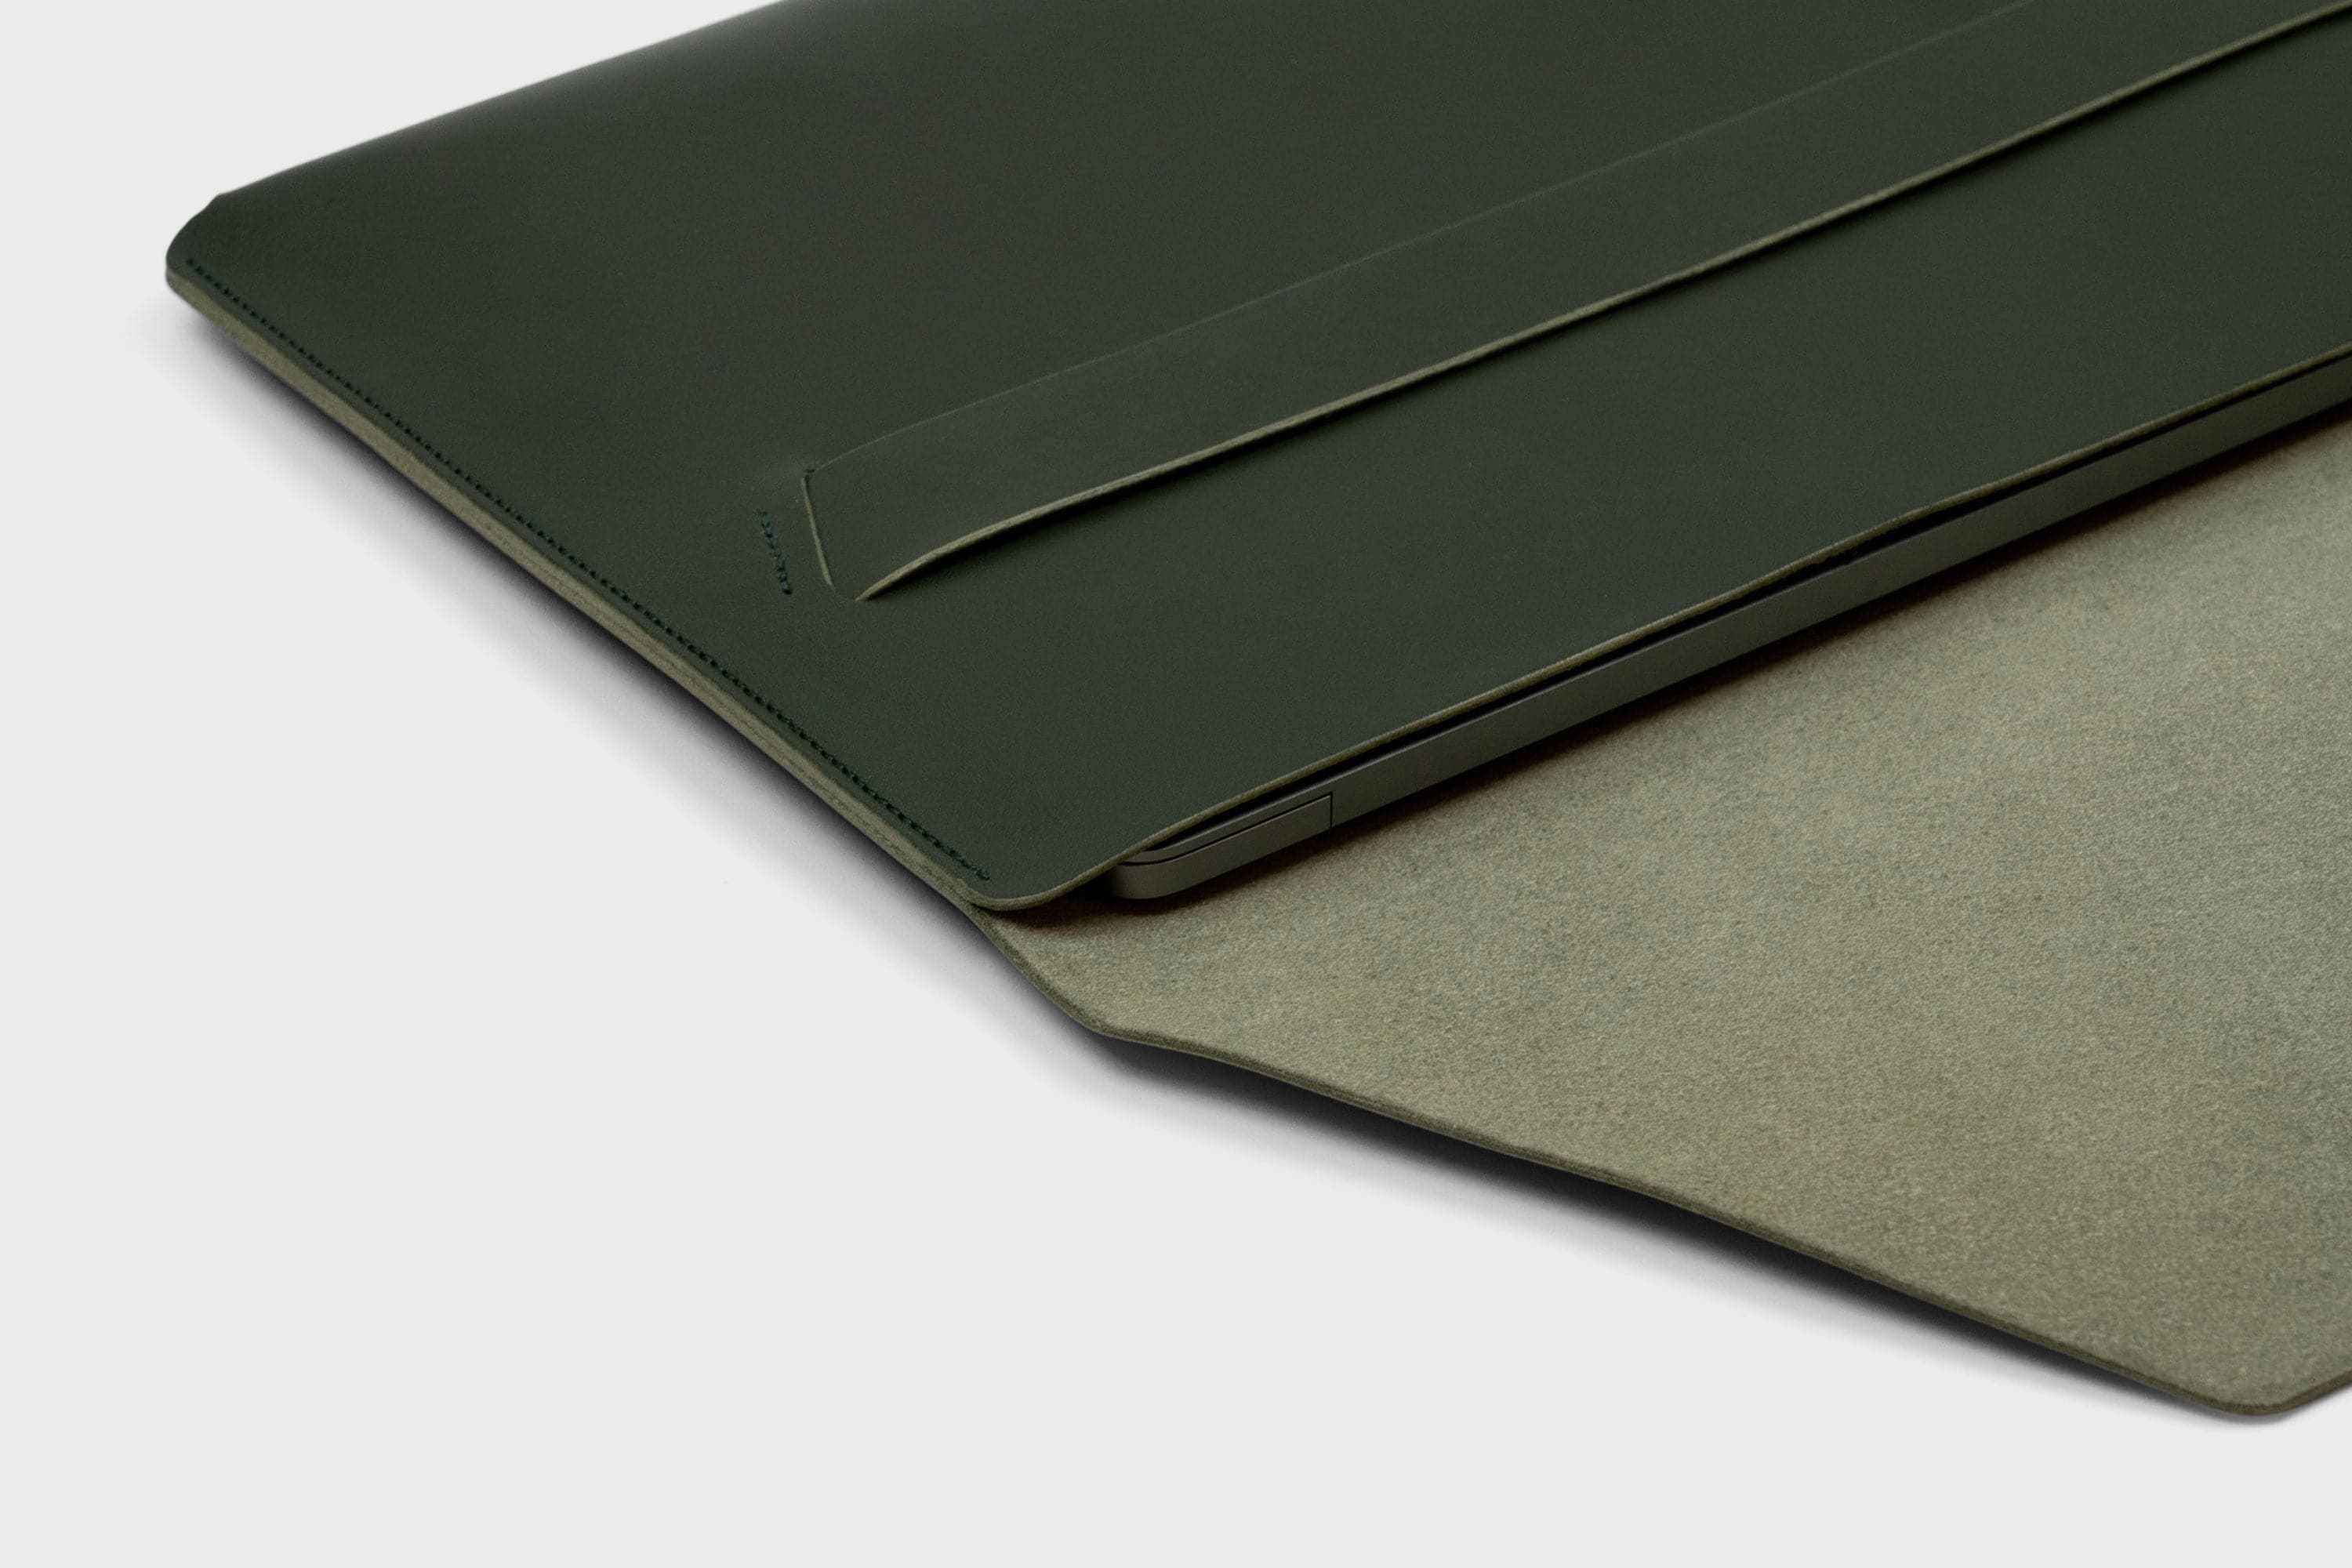 MacBook Pro 14 Inch Leather Sleeve Dark Olive Green Color Artisan Handmade and Designed By Manuel Dreesmann Atelier Madre Barcelona Spain